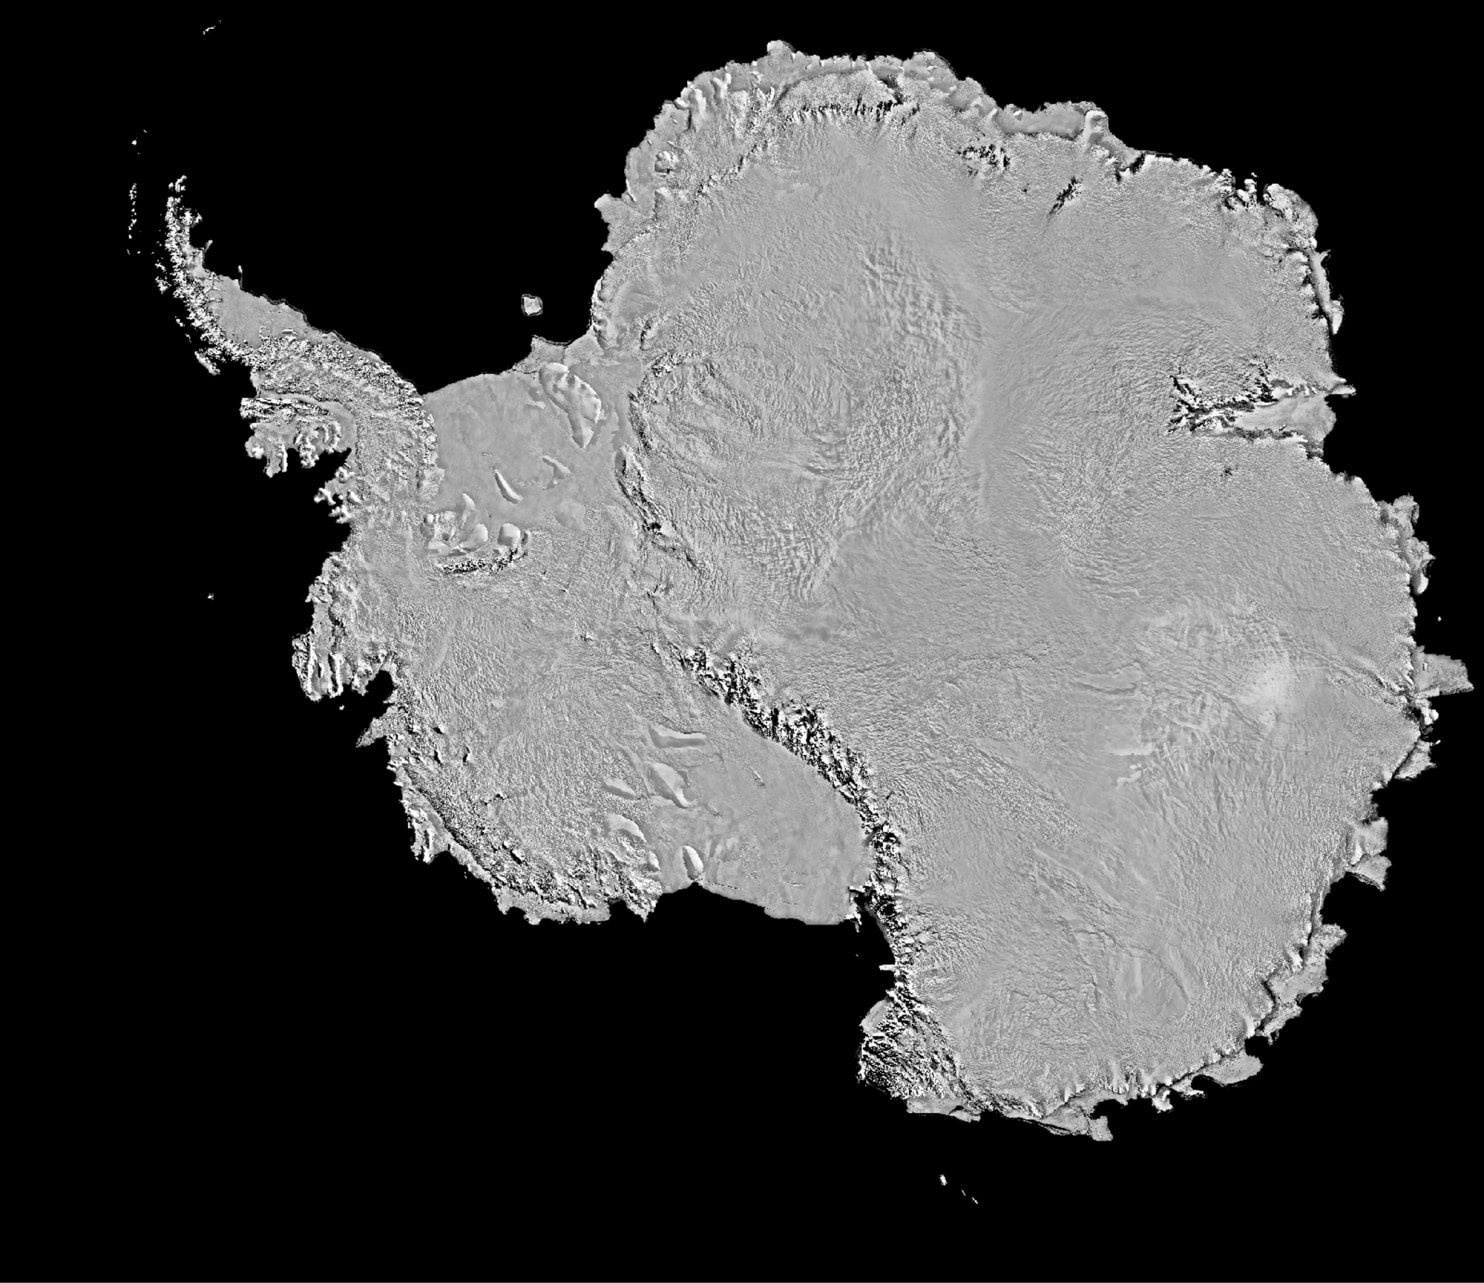 2013-2014 MODIS Mosaic of Antarctica. Courtesy of National Snow and Ice Data Center and NASA.